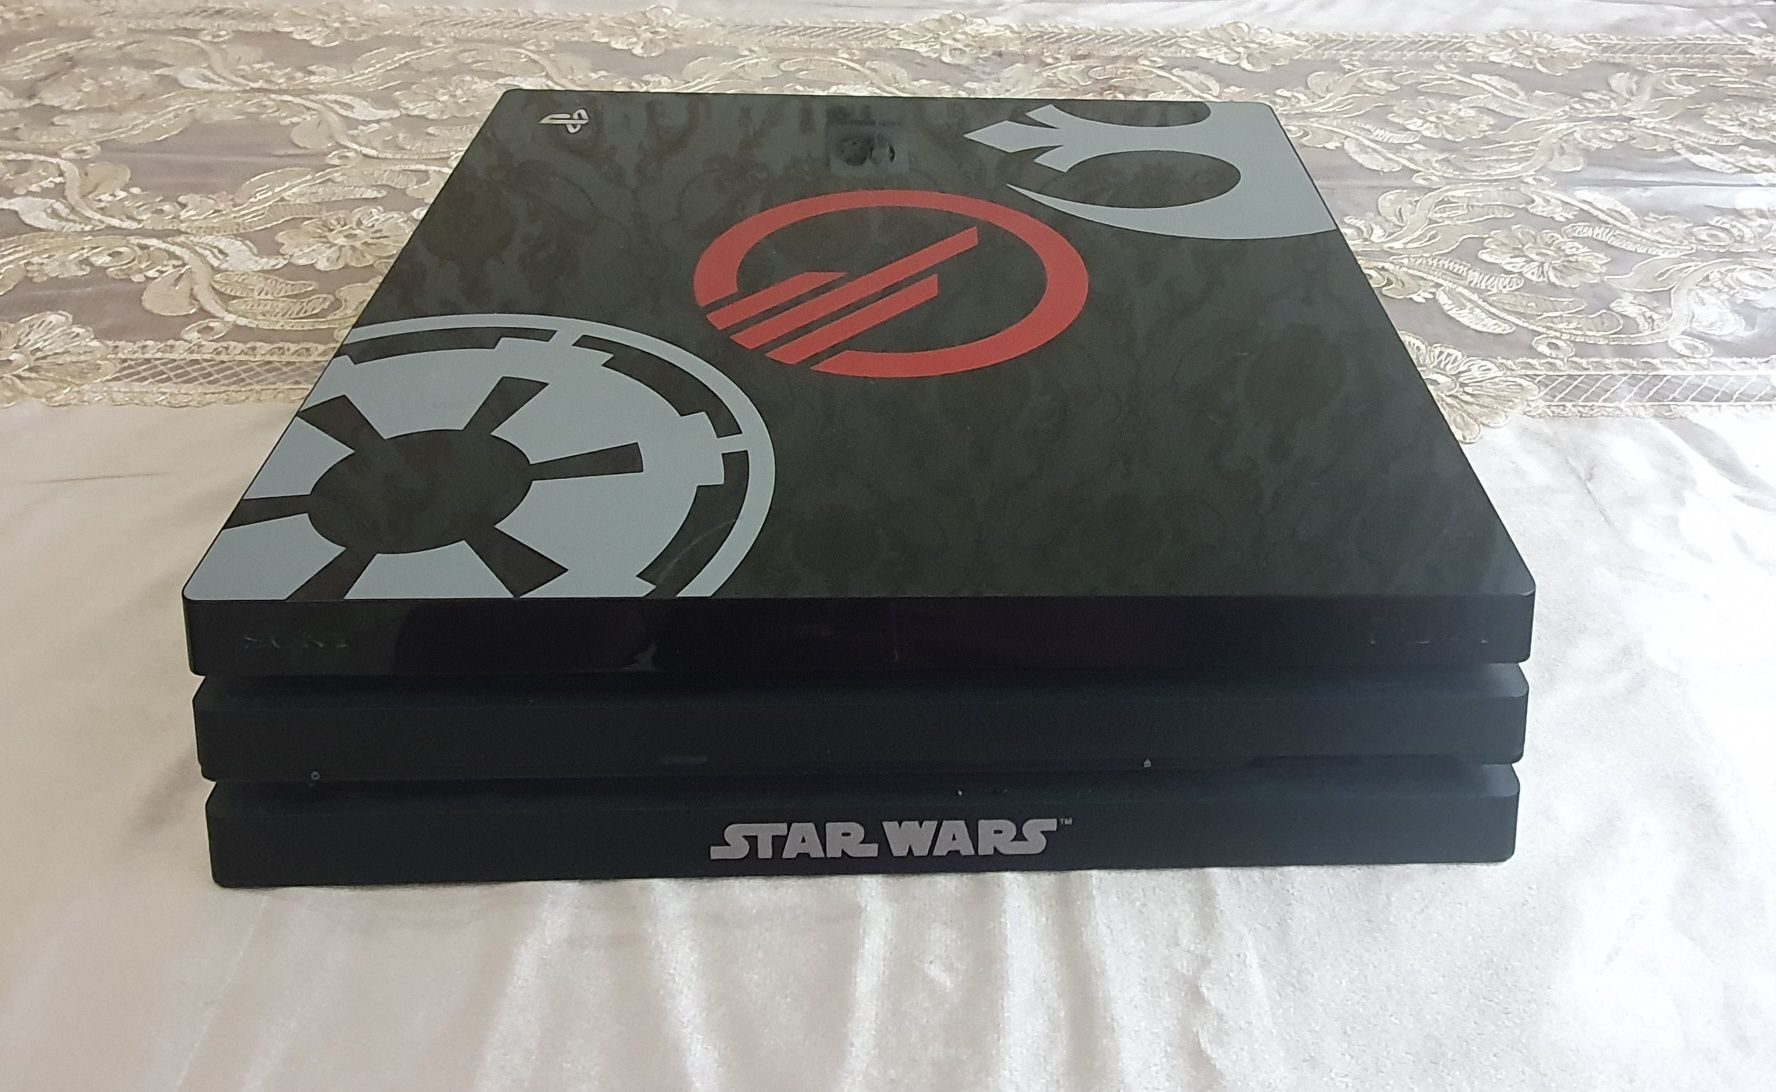 PlayStation 4 PRO Exclusive
Ps4 PRO { 4K } HDR Bor 1.TB
 " STAR WARS "